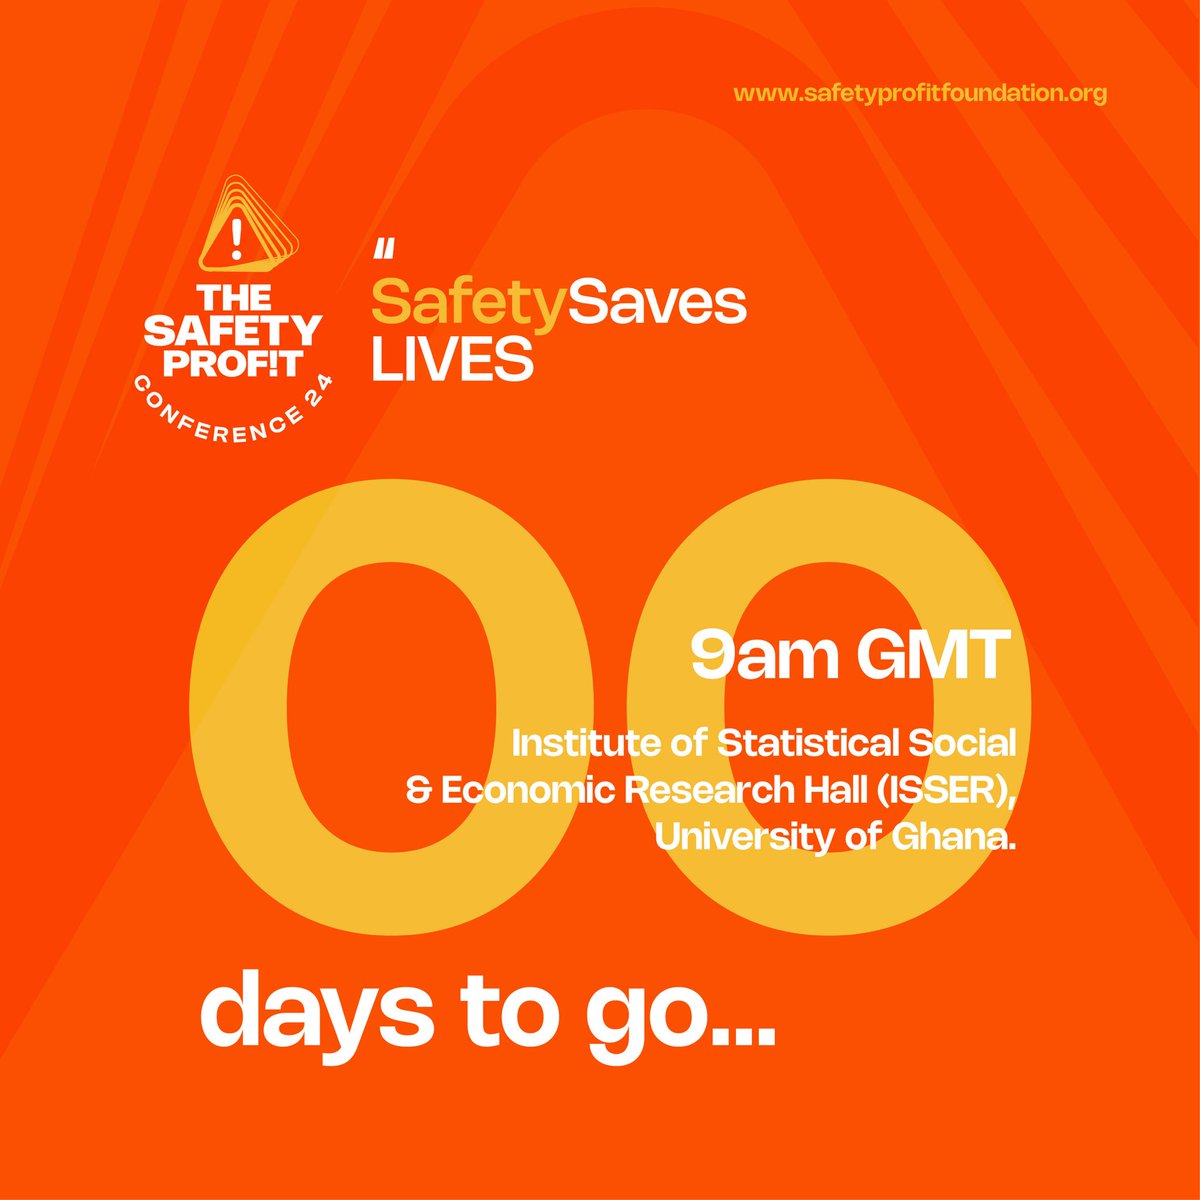 It’s TODAY!!! We can’t wait to see you there!!! It’s going to be an amazing and incredible experience. #SafetySavesLives #thesafetyprofitconference #tspc